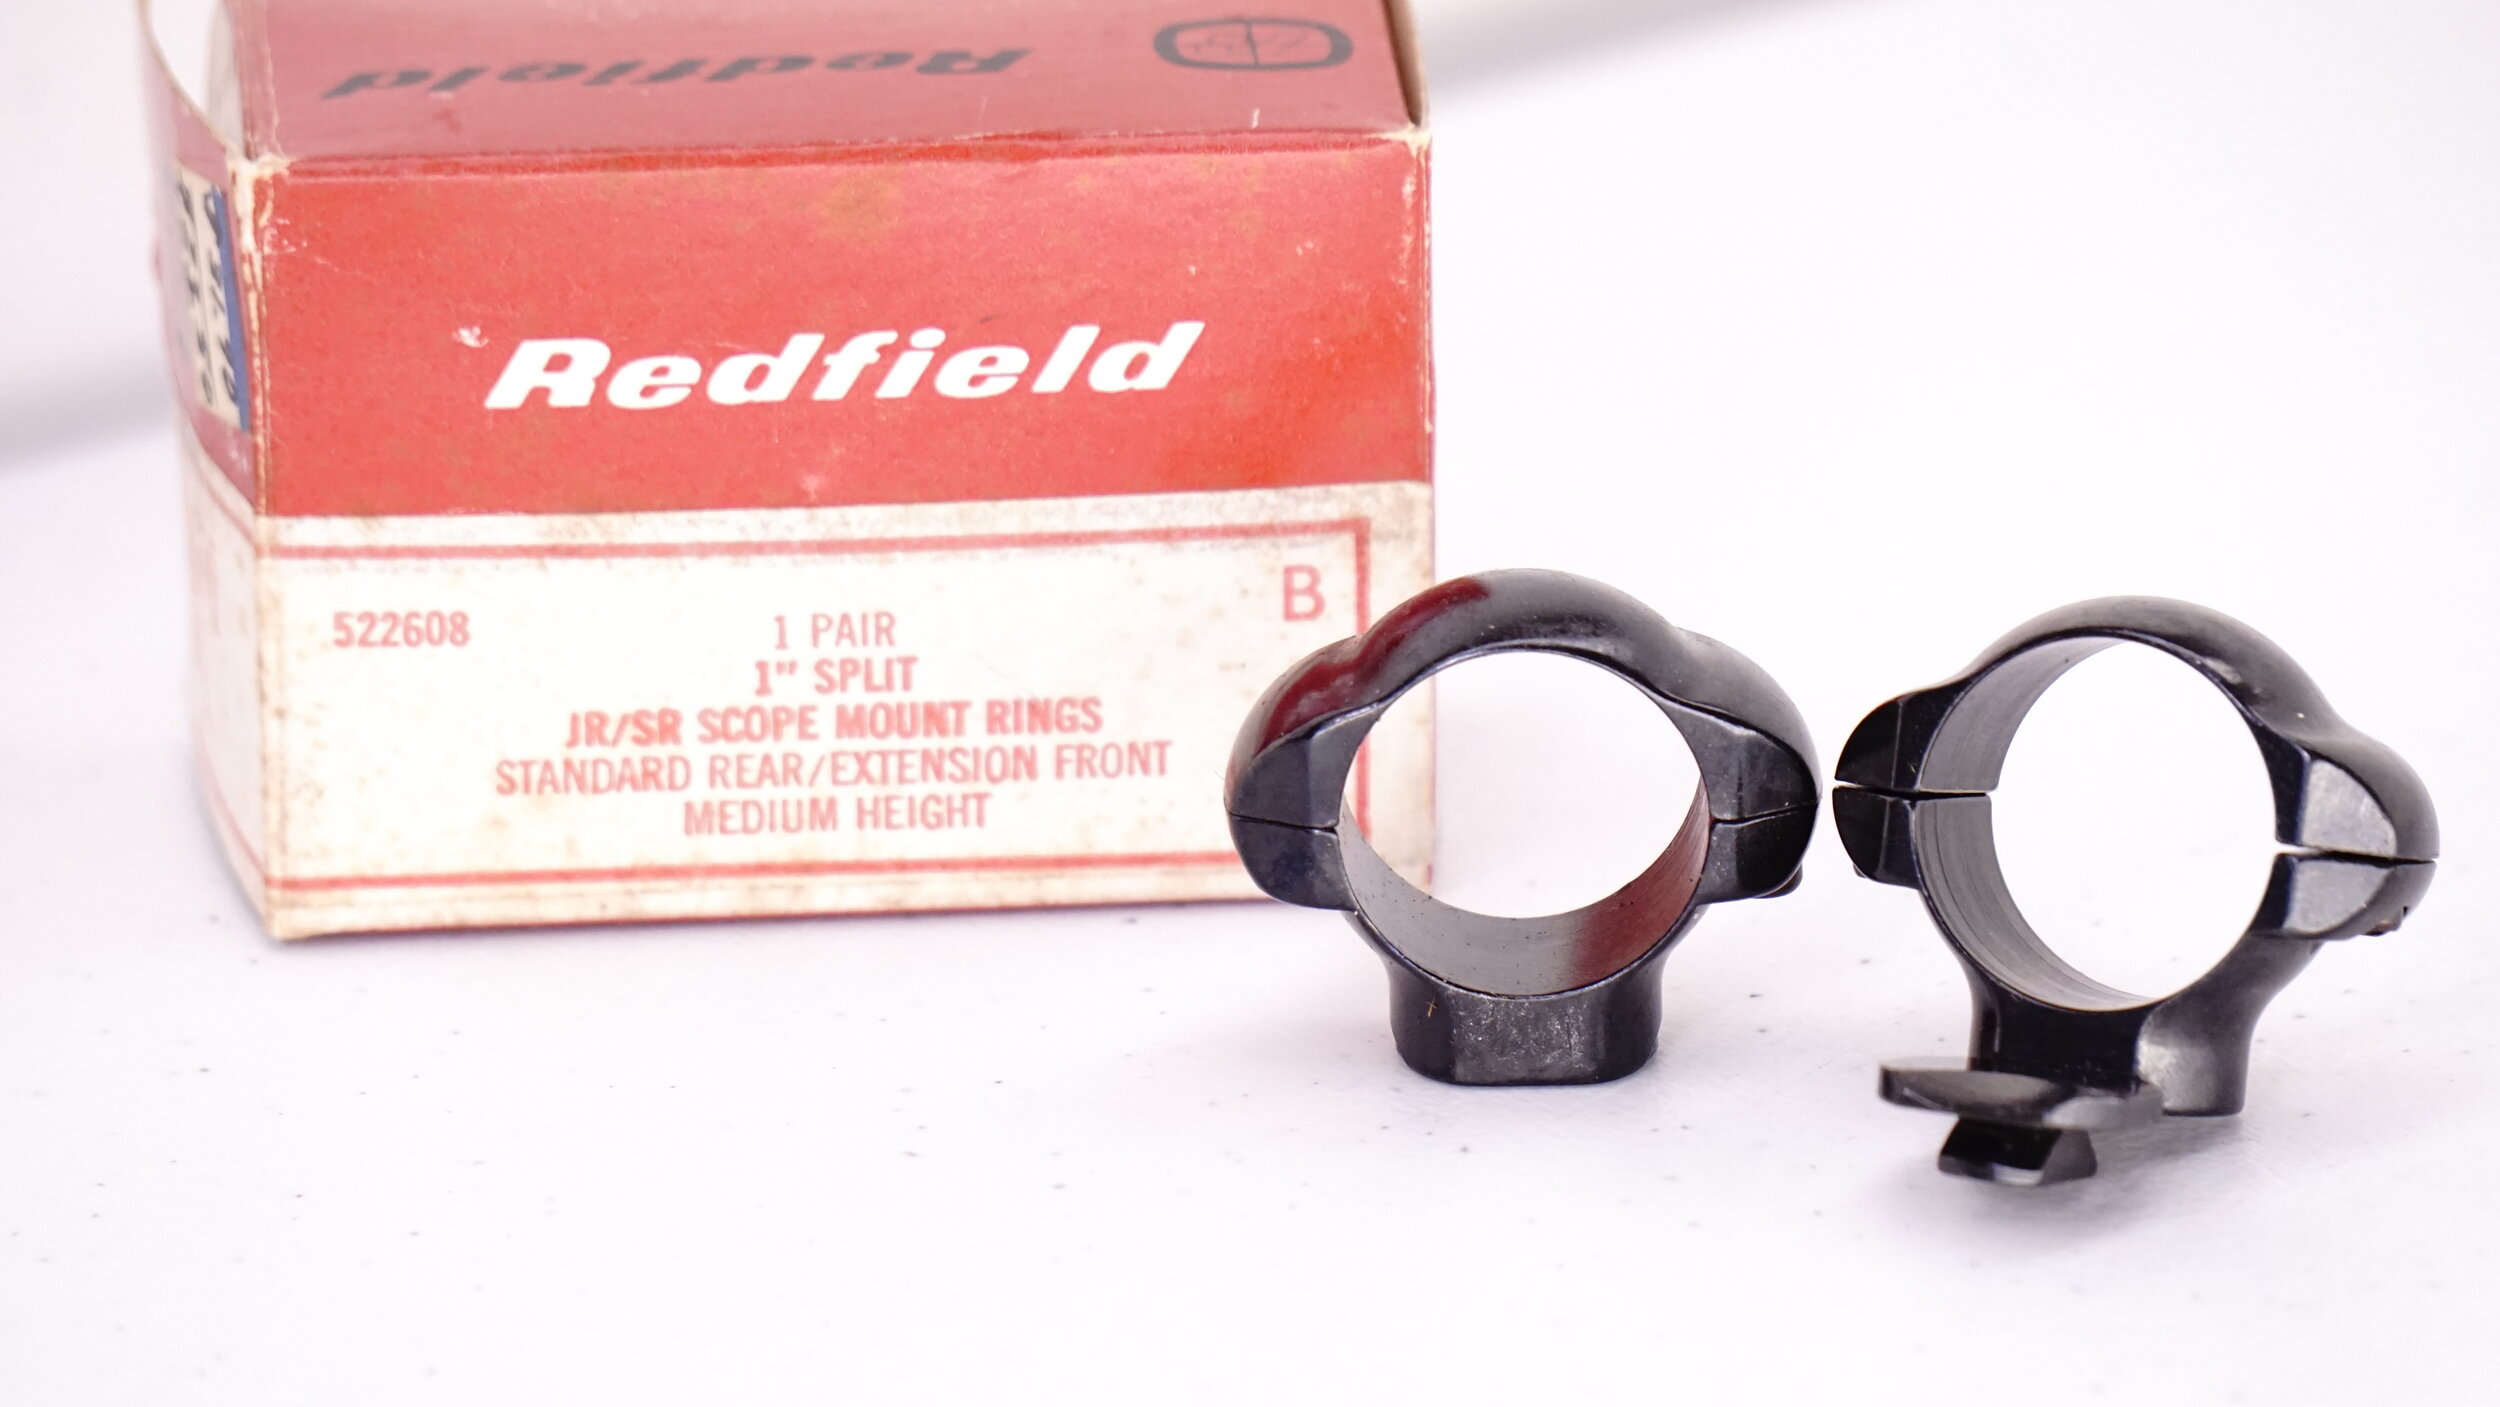 Extension Front and Standard Rear Redfield 47220 Rifle scope Rings 1" Dovetail